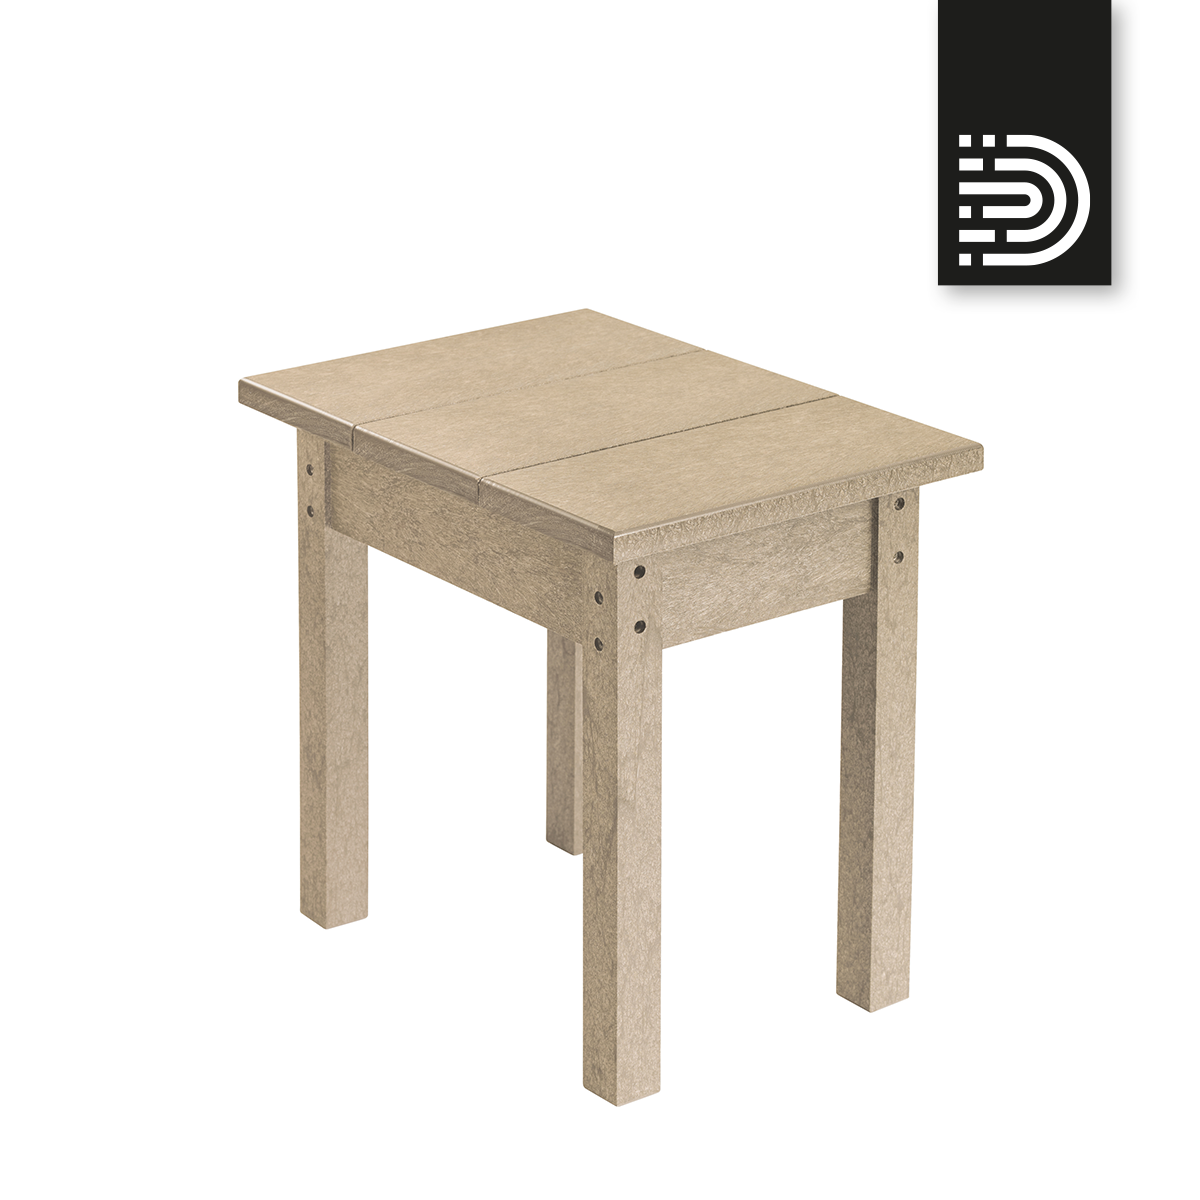 T01 small rectangular table - beige 07